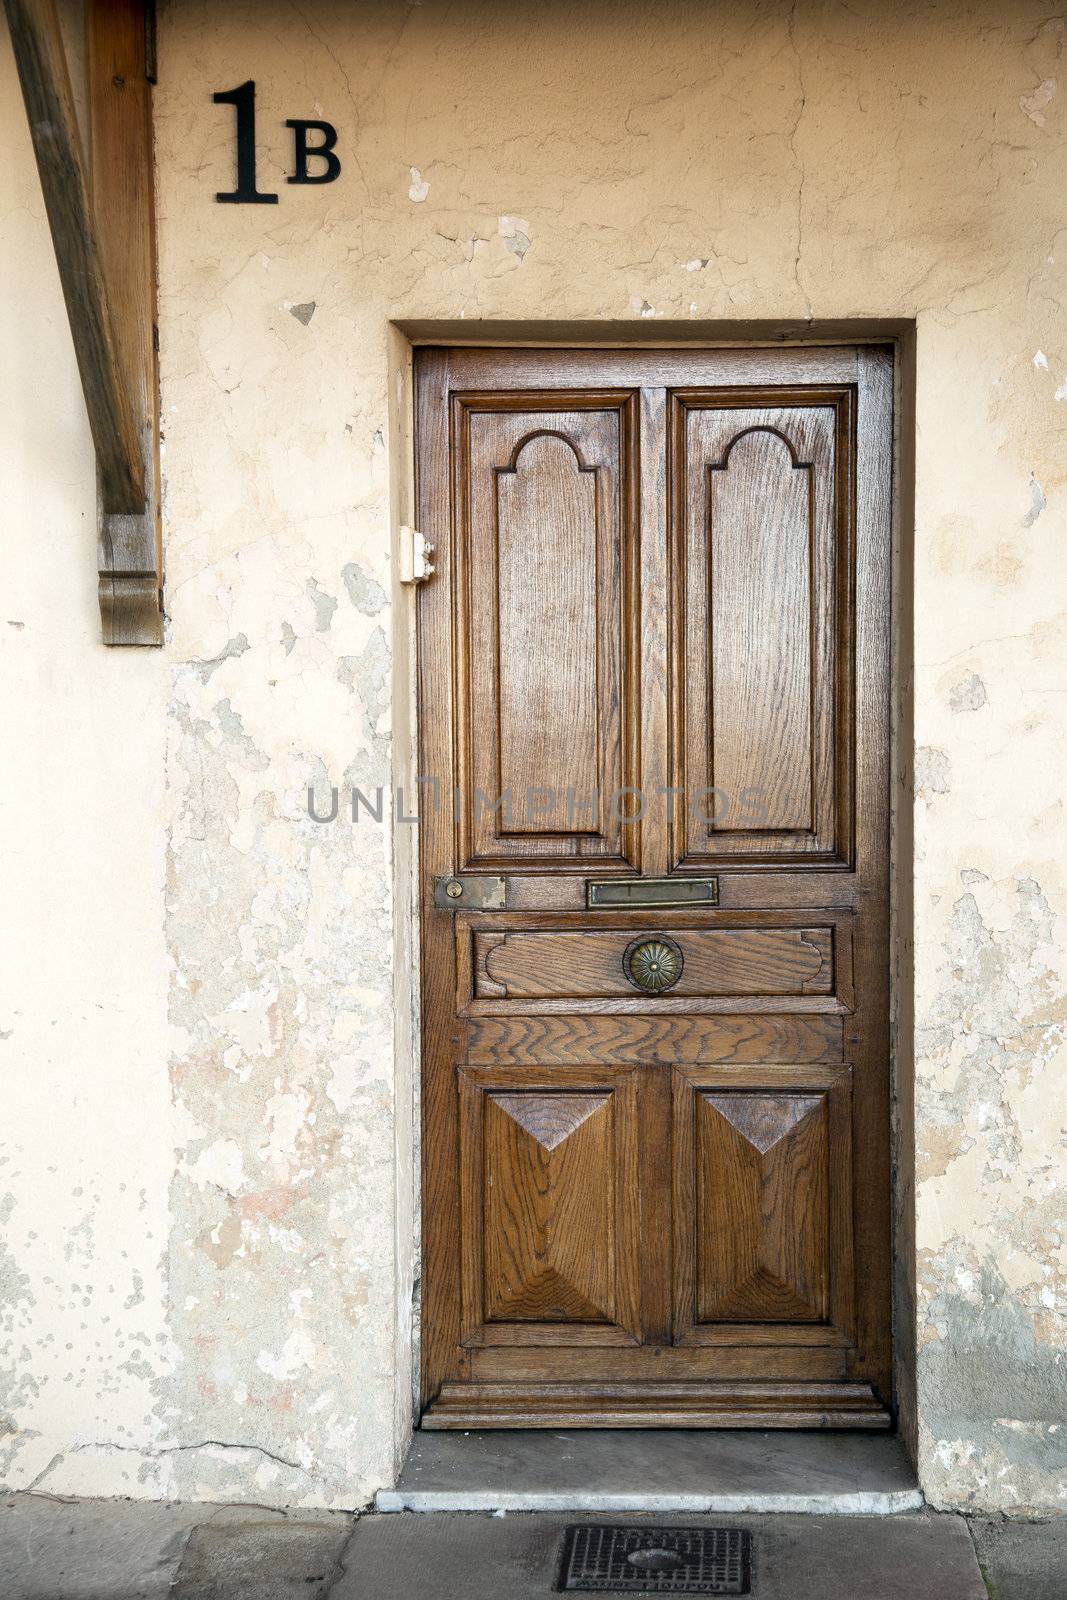 Old wooden door in weathered building with house number 1B.